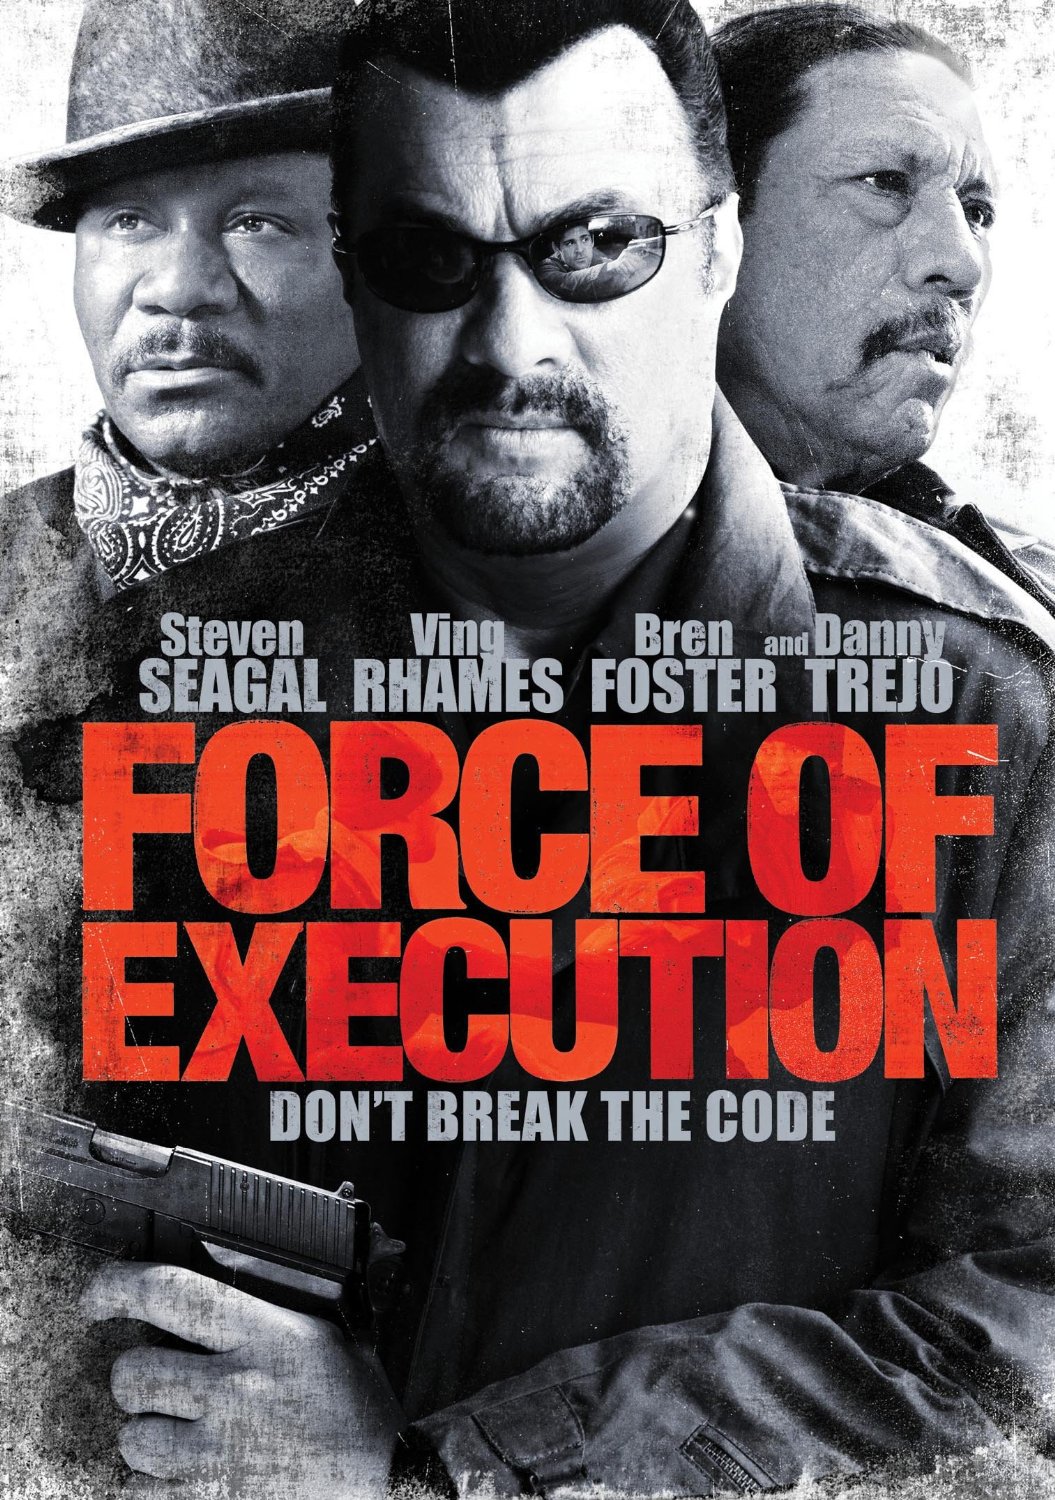 Steven Seagal, Ving Rhames and Danny Trejo in Force of Execution (2013)